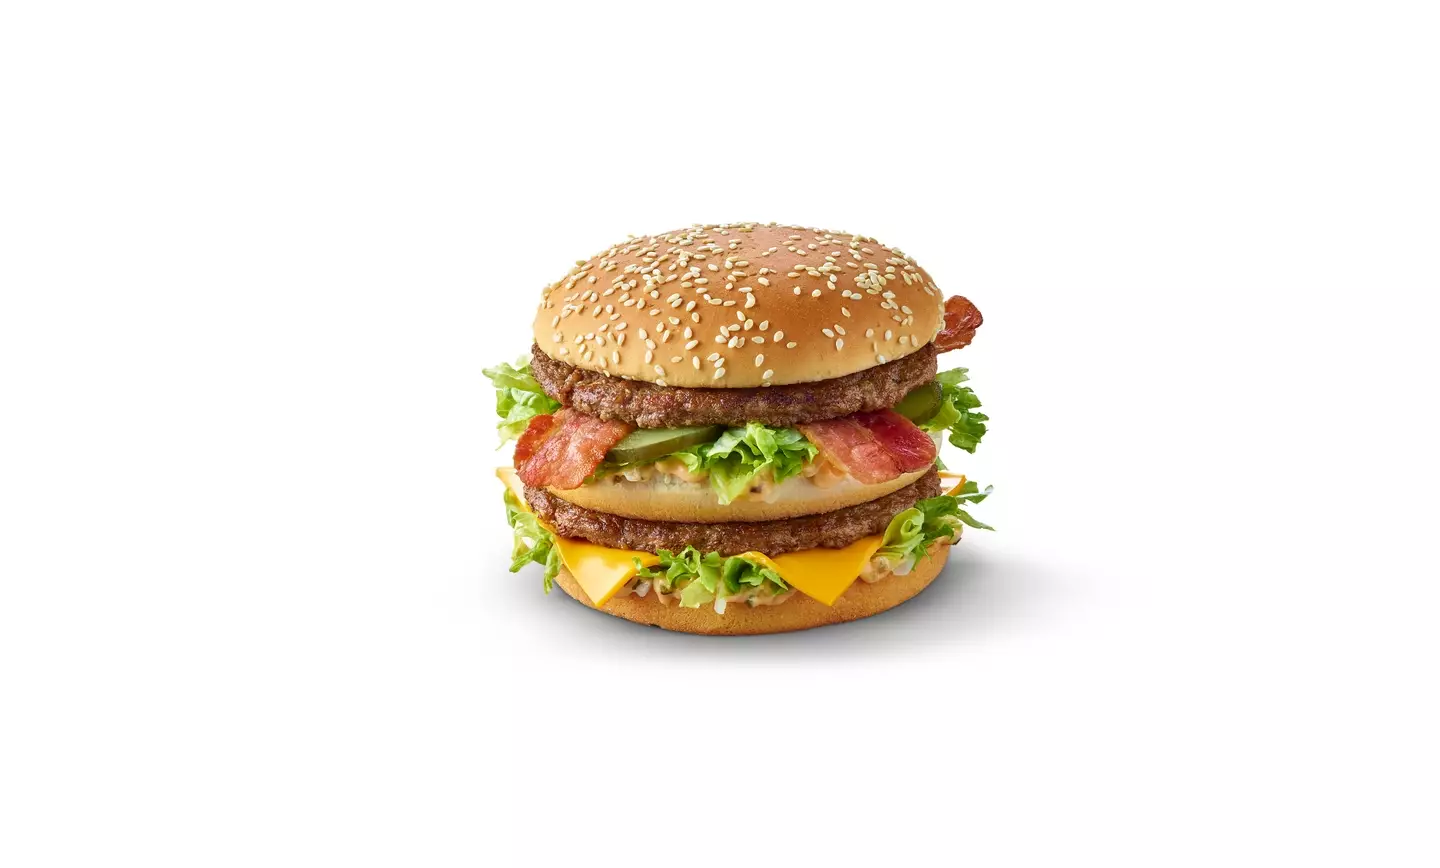 The Grand Big Mac with Bacon will be back on 27 April.